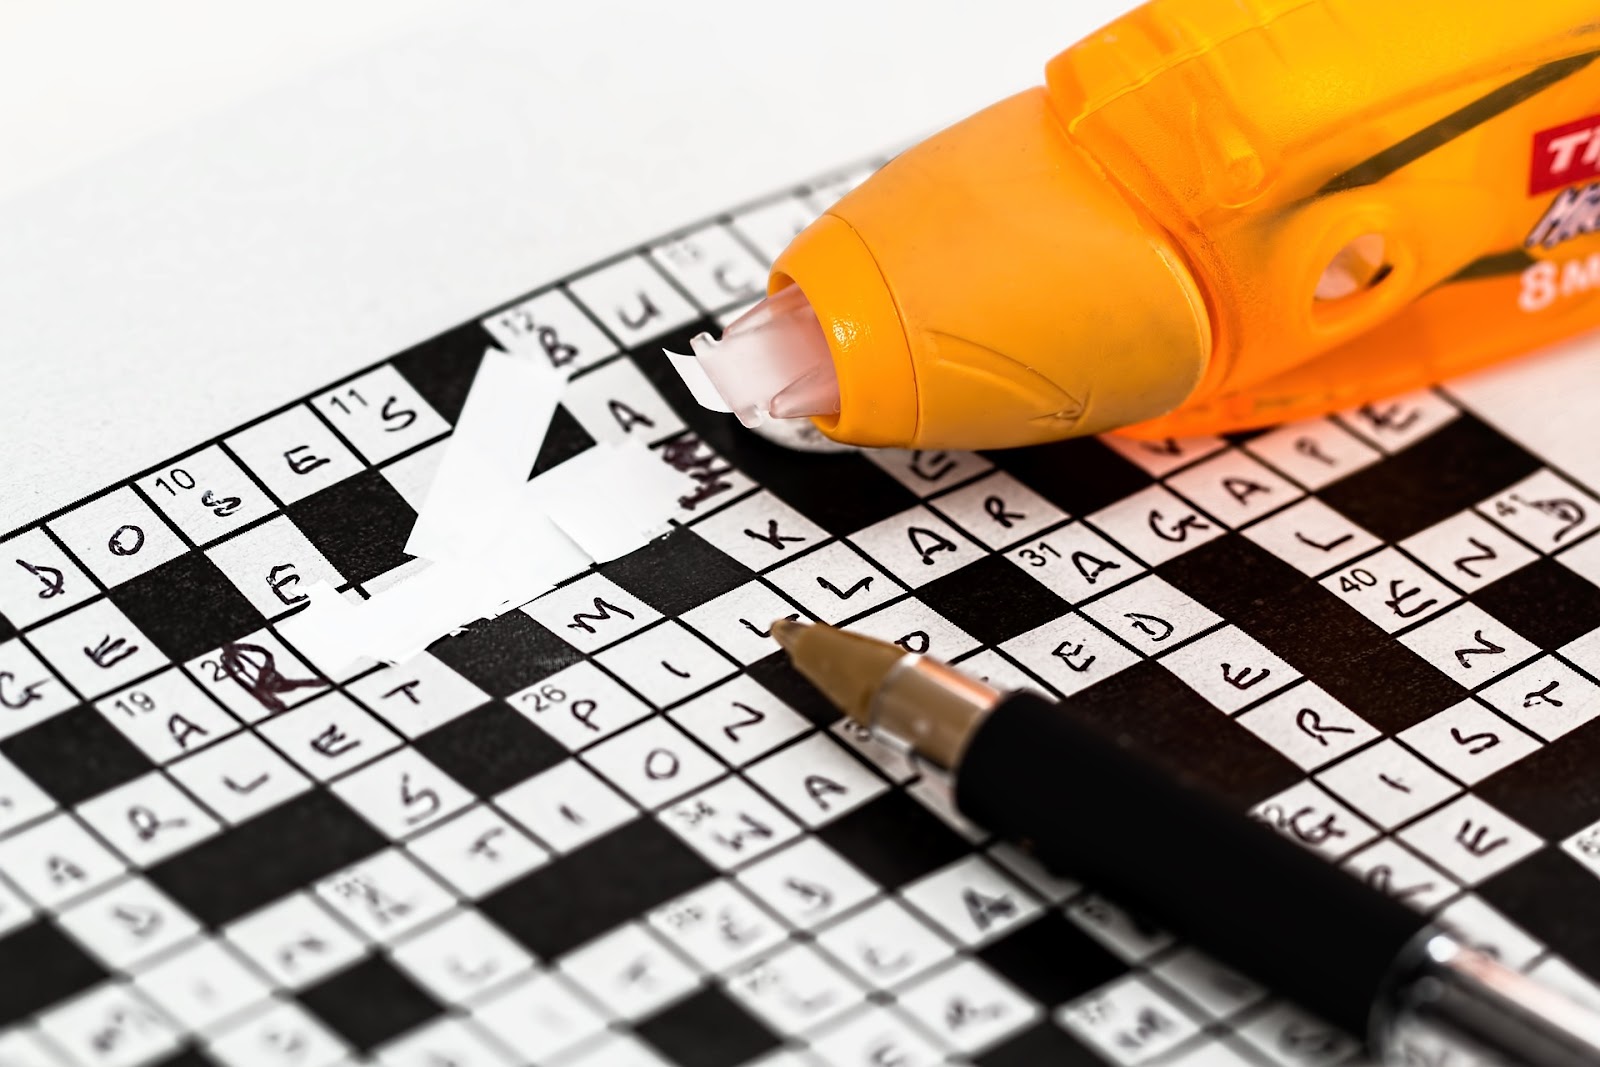 A close up of a crossword puzzle that has had an error fixed with correction tape.